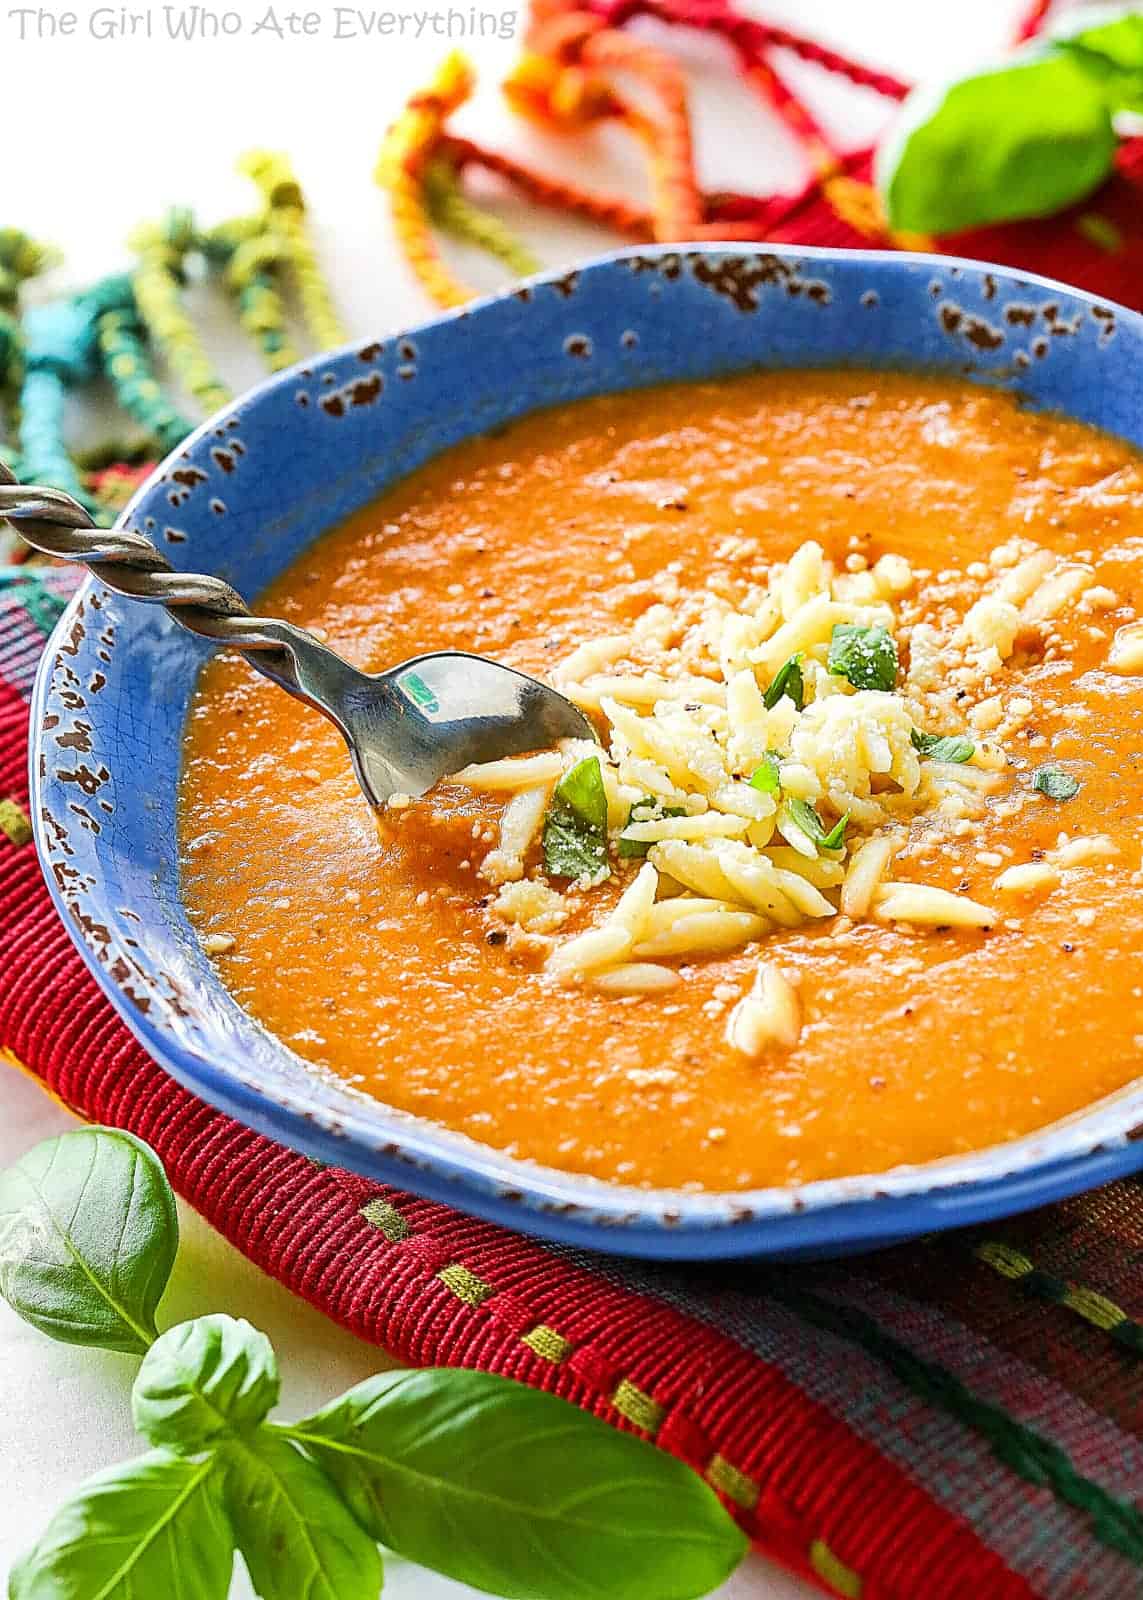 Slow Cooker Tomato Basil Parmesan Soup - The Girl Who Ate Everything